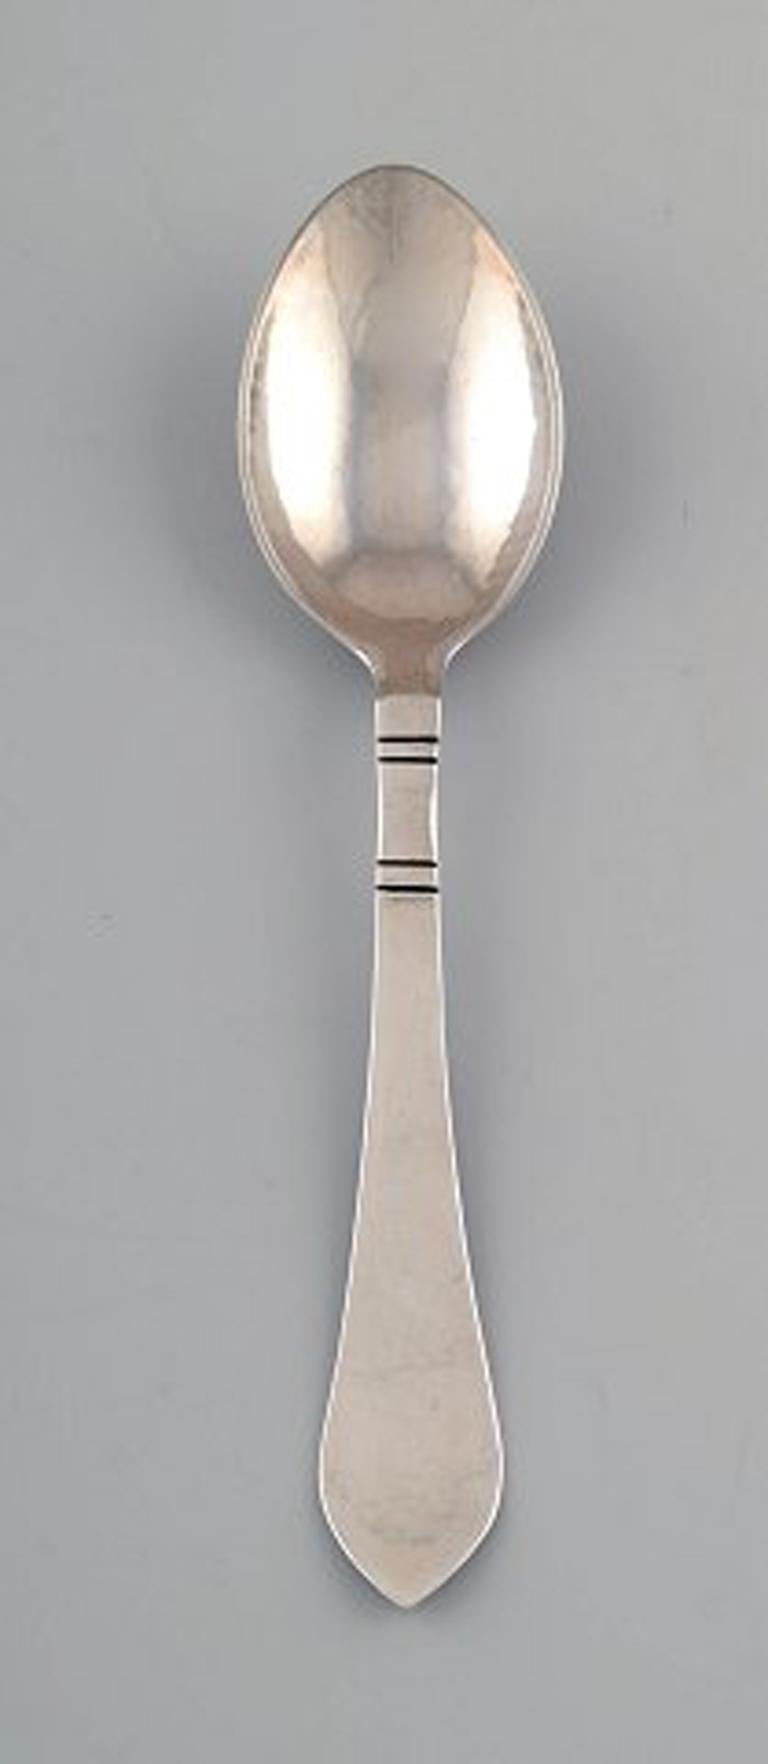 Georg Jensen continental, 12 child spoons/ large tea spoons, silver cutlery, hand-hammered. 
The cutlery is designed by Georg Jensen in 1906.
In perfect condition.
Measures: 15.5 cm.